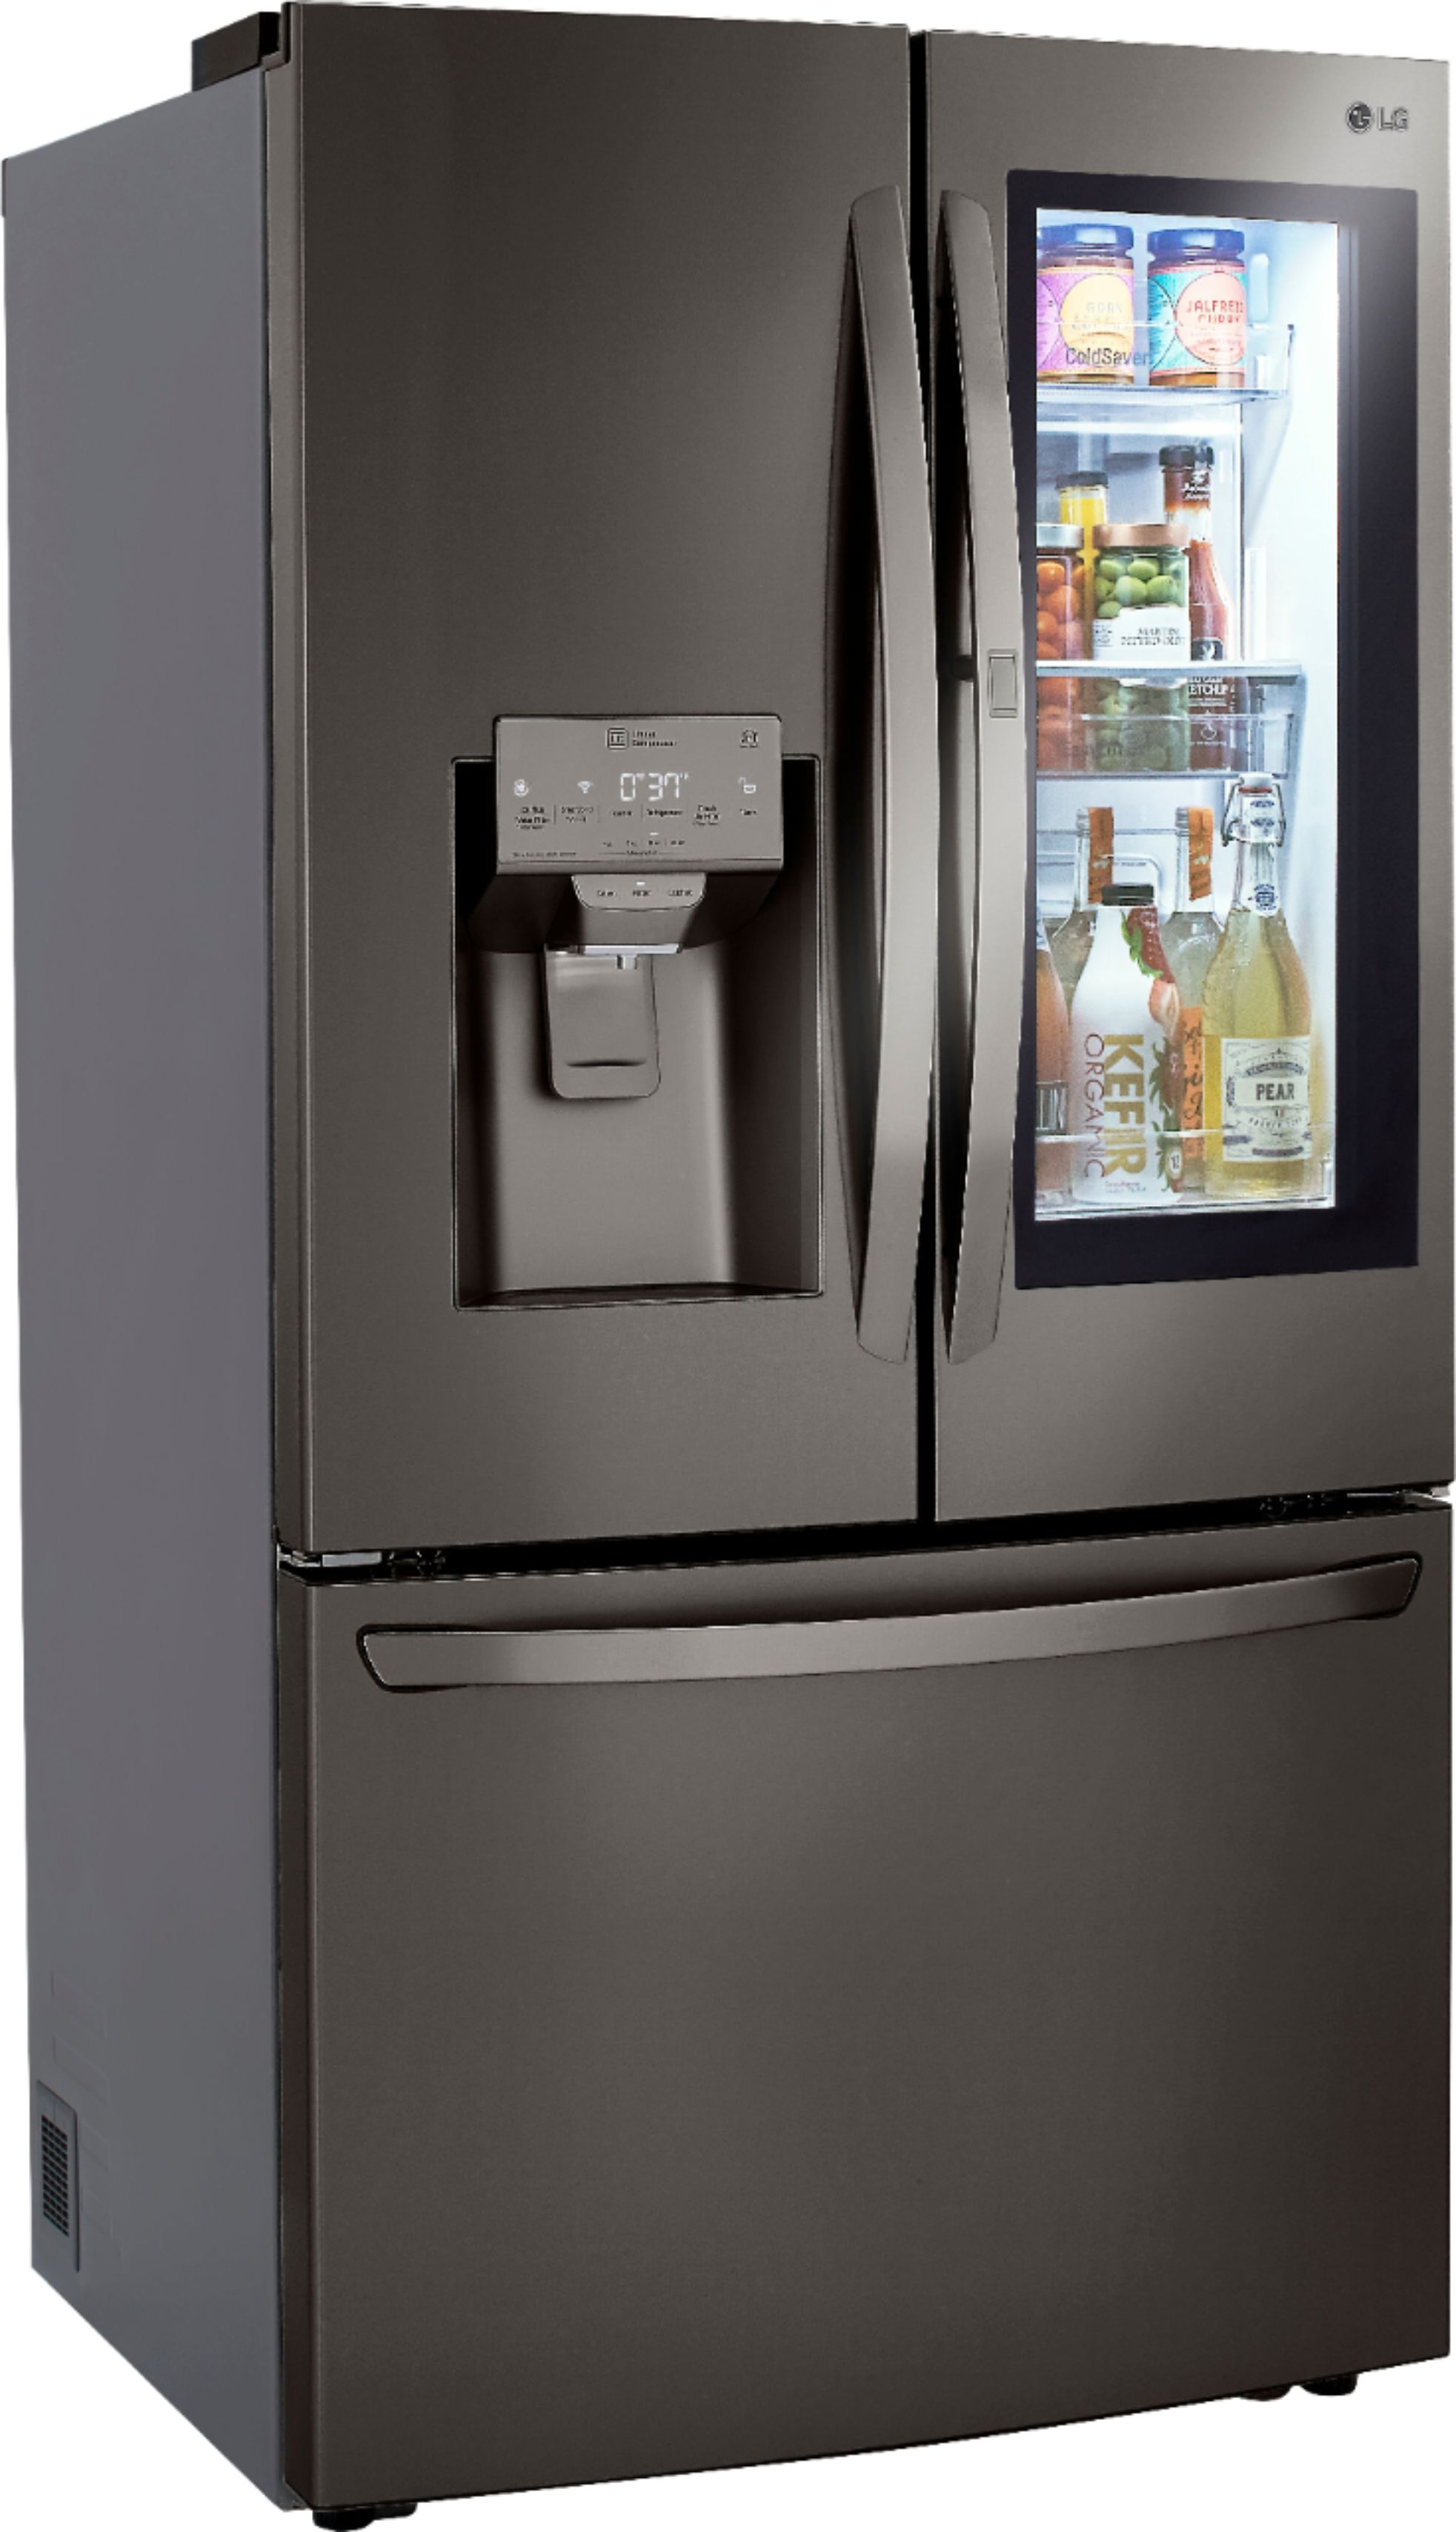 Angle View: LG - 29.7 Cu. Ft. French InstaView Door-in-Door Refrigerator with Craft Ice - Black stainless steel